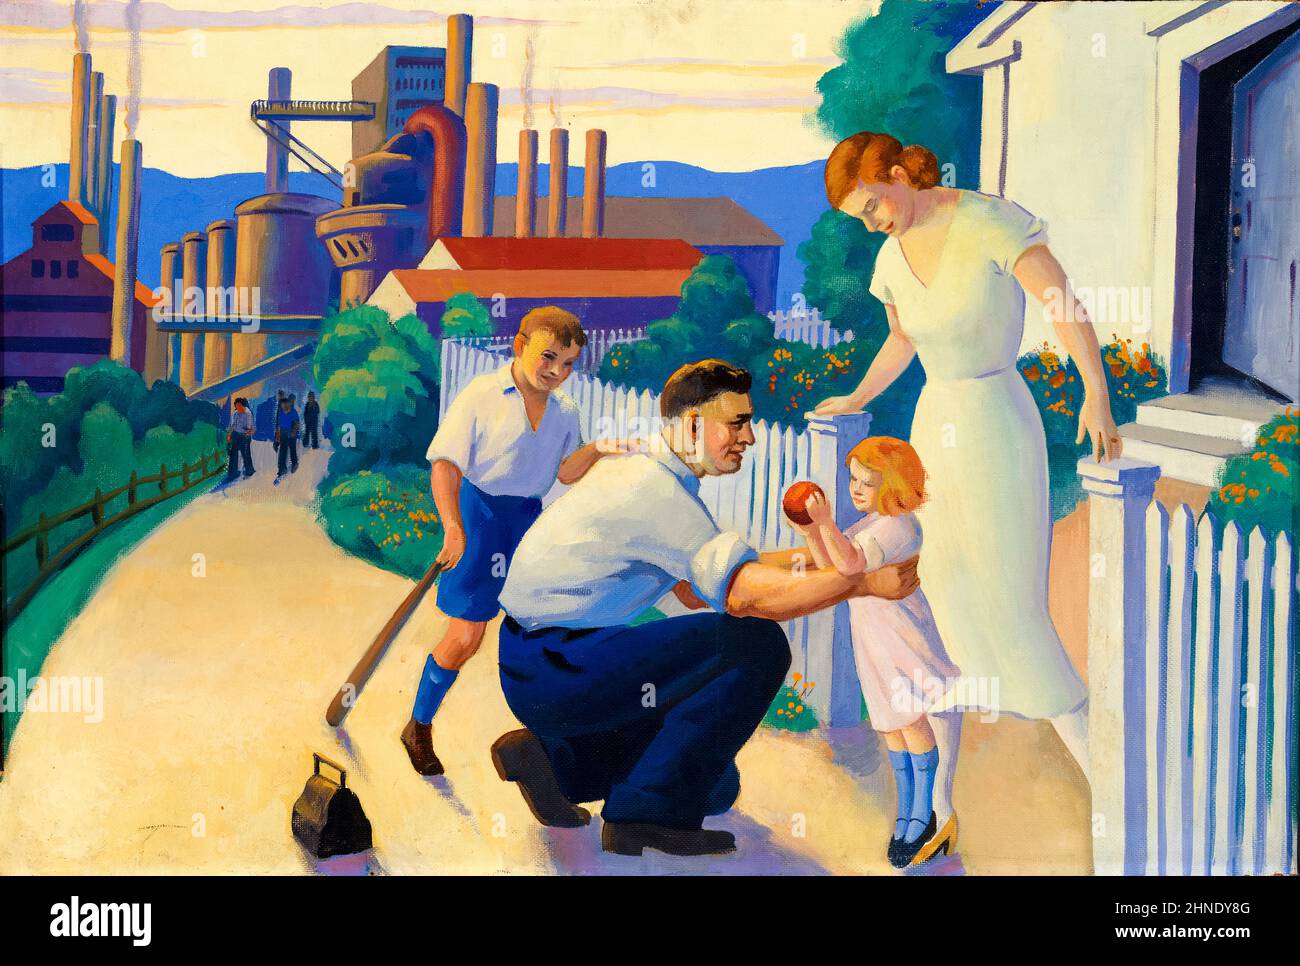 1930s America, typical American happy family scene, New Deal painting, oil on fibreboard, 1933-1943 - unidentified artist Stock Photo